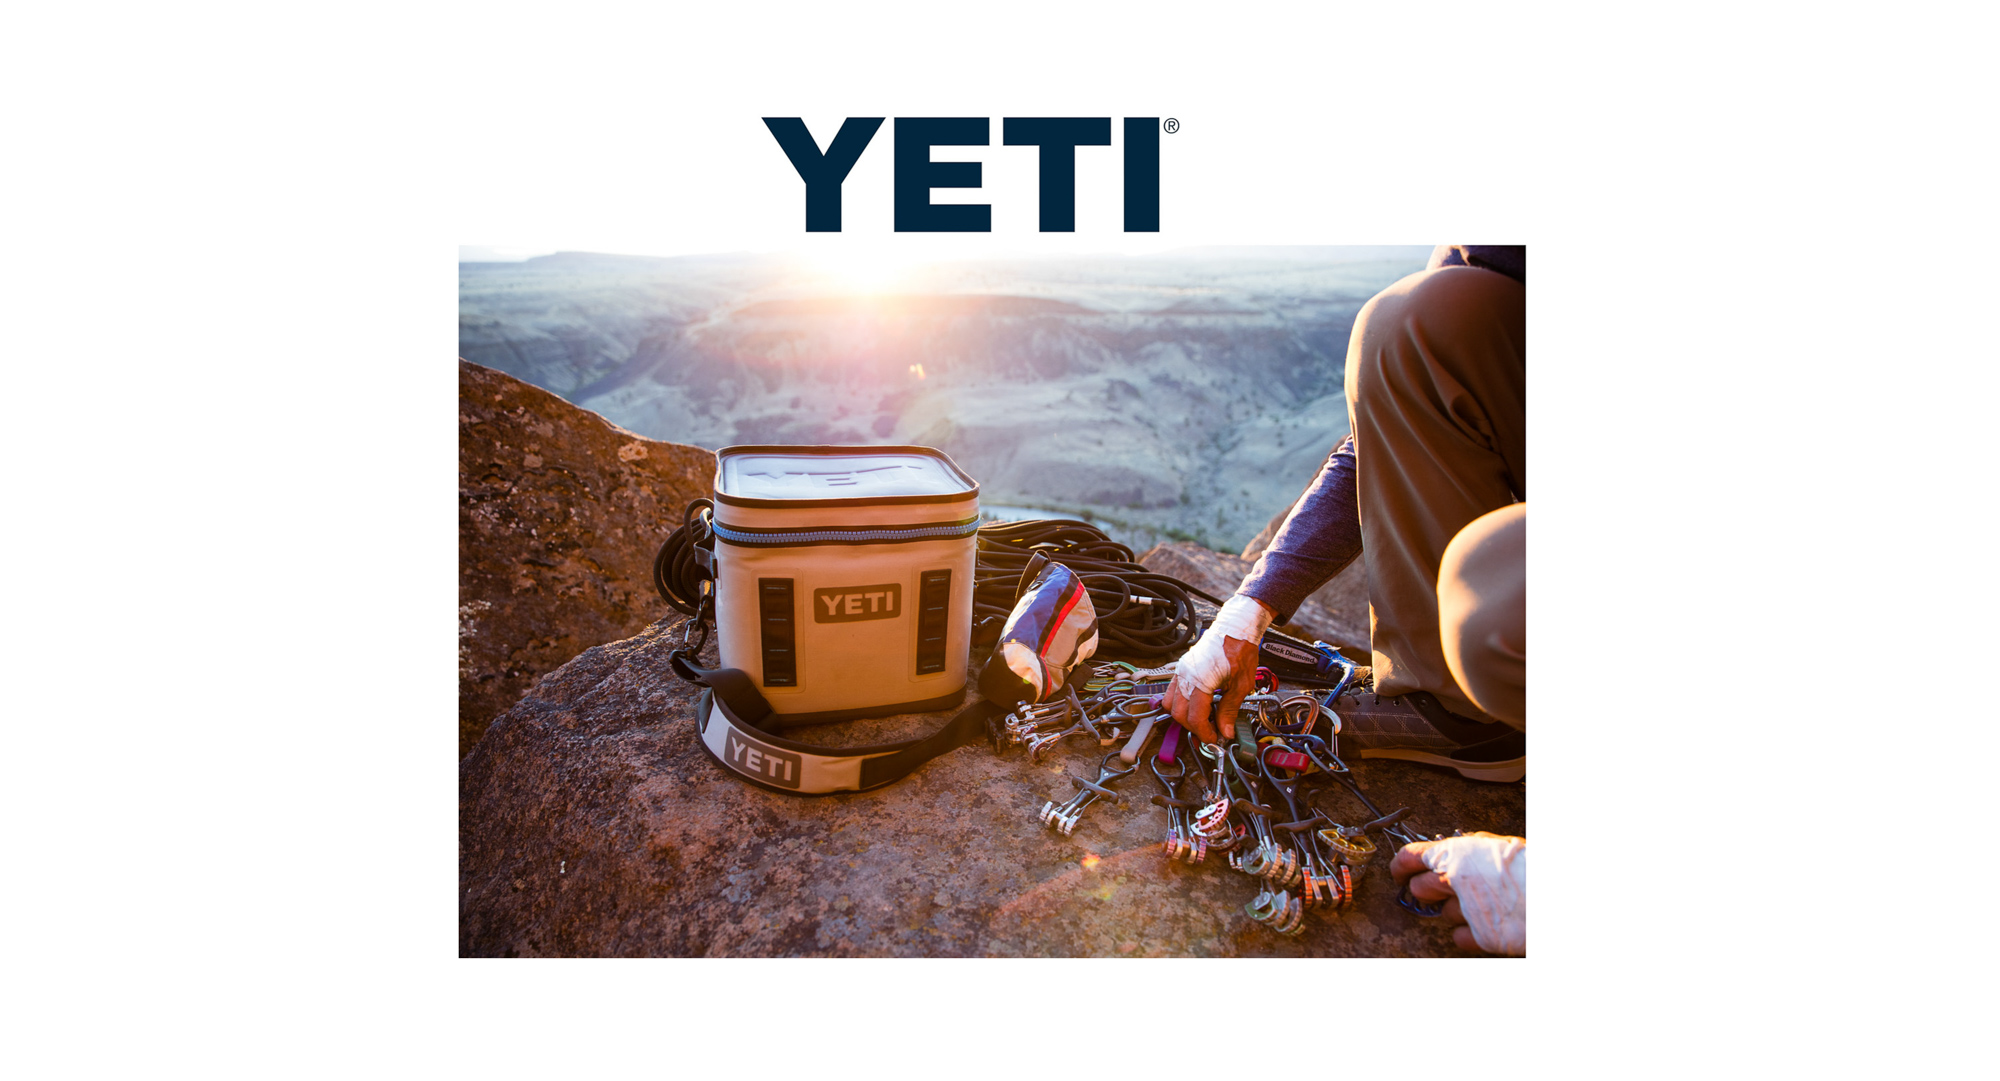 YETI Coolers | Lifestyle Commercial Photography 